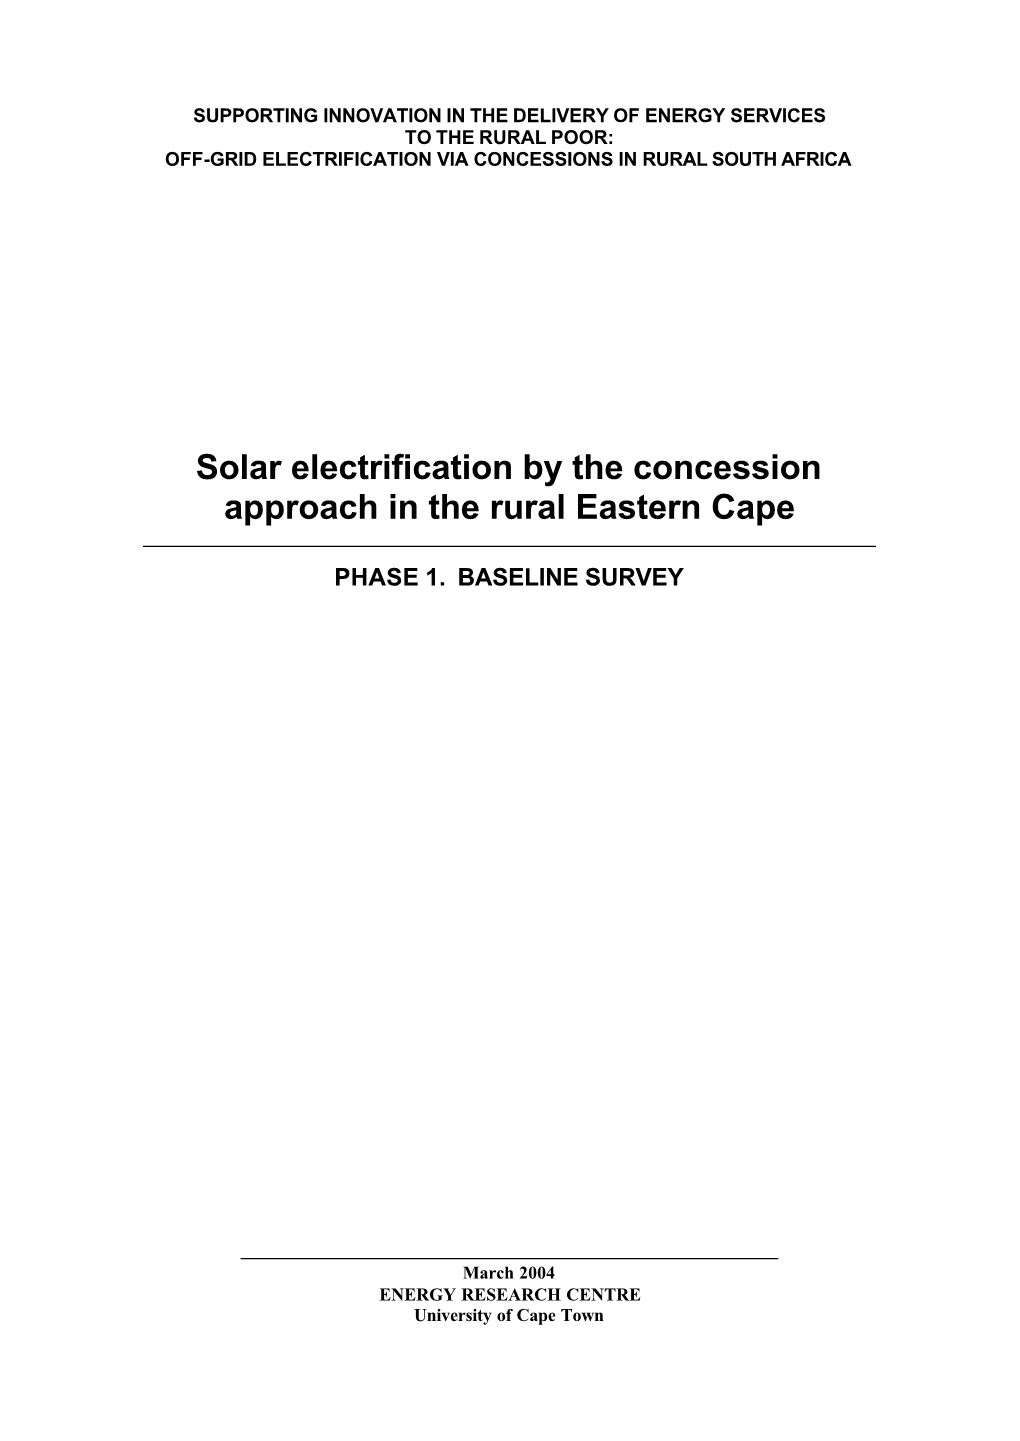 Solar Electrification by the Concession Approach in the Rural Eastern Cape